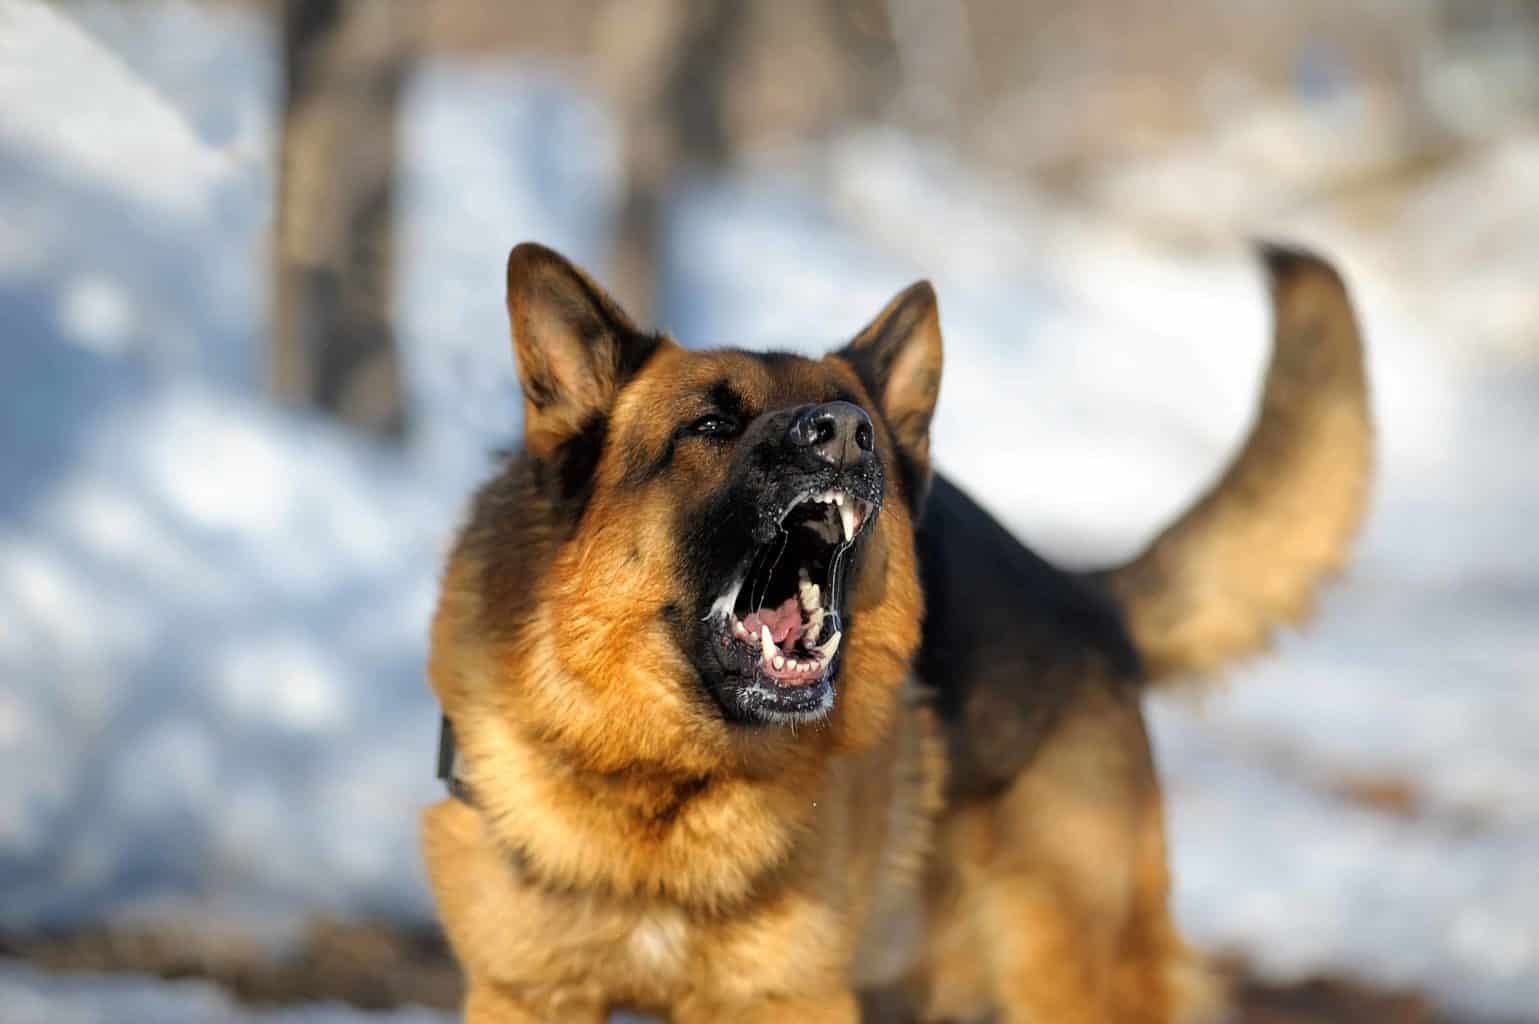 Angry German shepherd bites. If your dog attacks someone, your natural reaction would be to scream. However, if your dog hears you yell or sees you frightened, it becomes more likely to continue the attack.